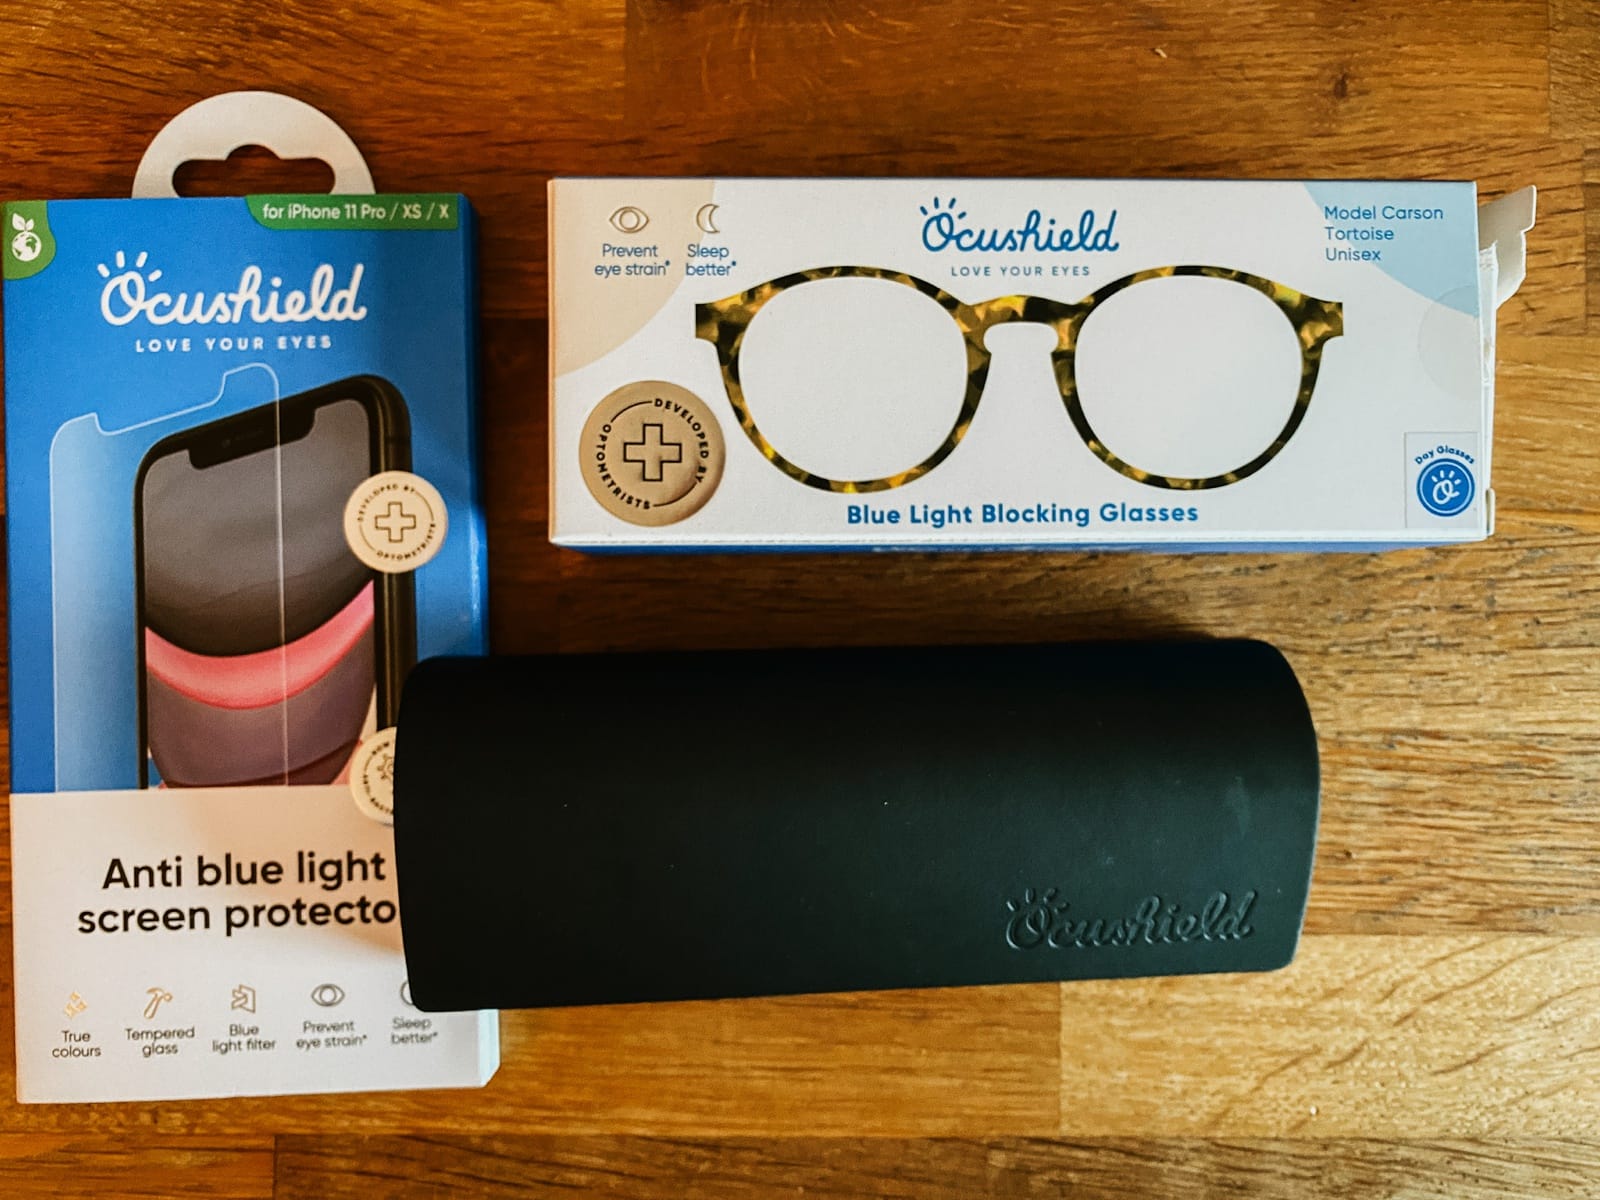 A photo showing blue light blocking glasses and a smartphone screen protector from Ocushield lying on a wooden table